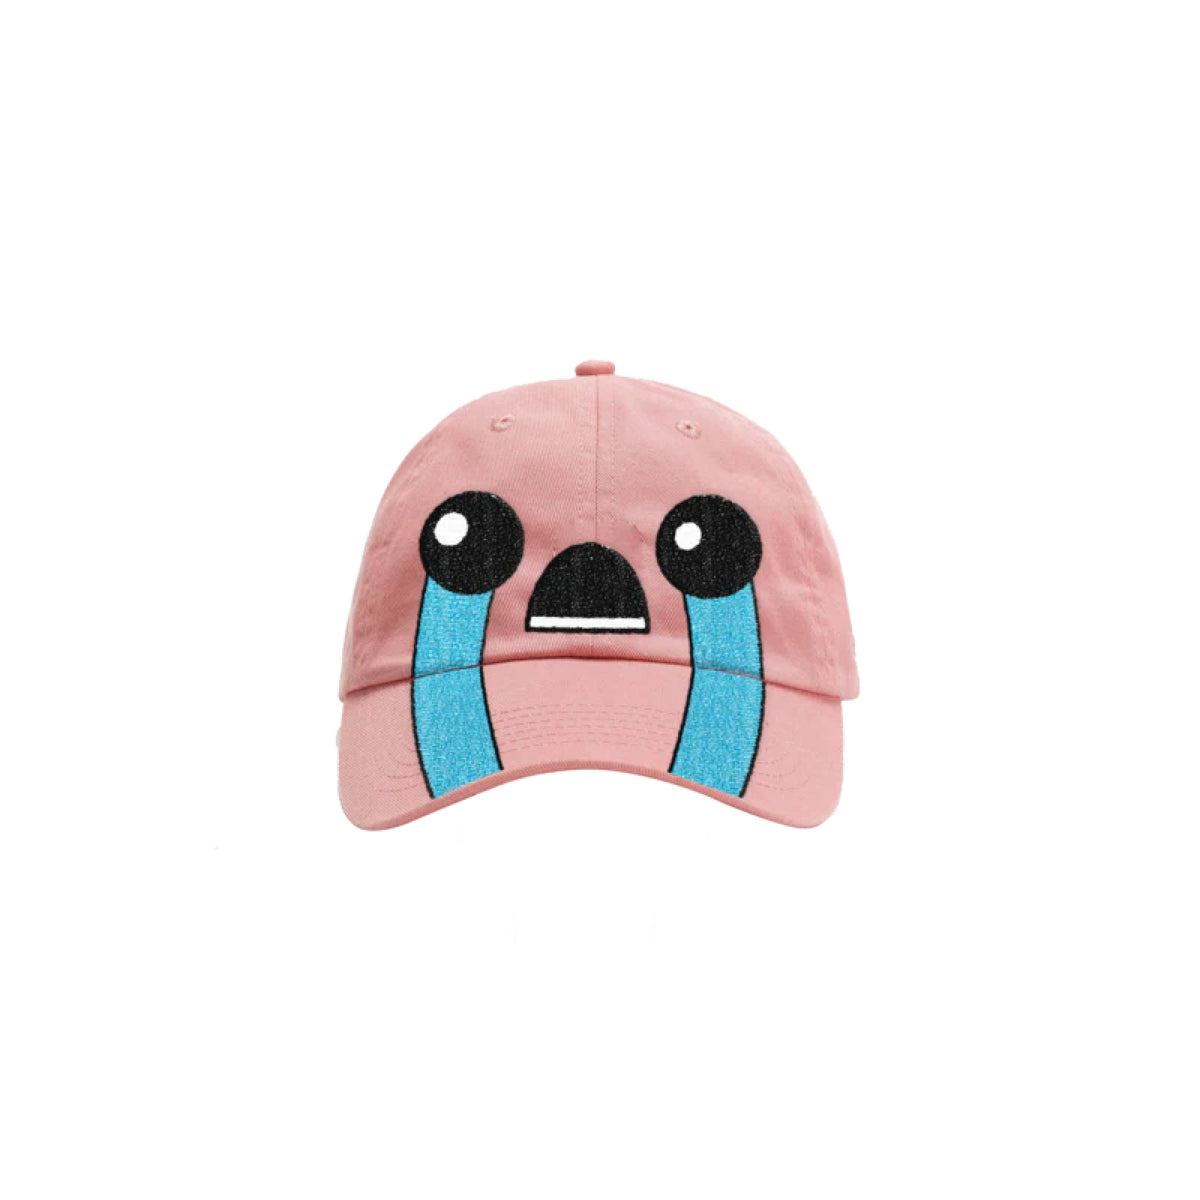 The Binding of Isaac Classic Isaac Hat